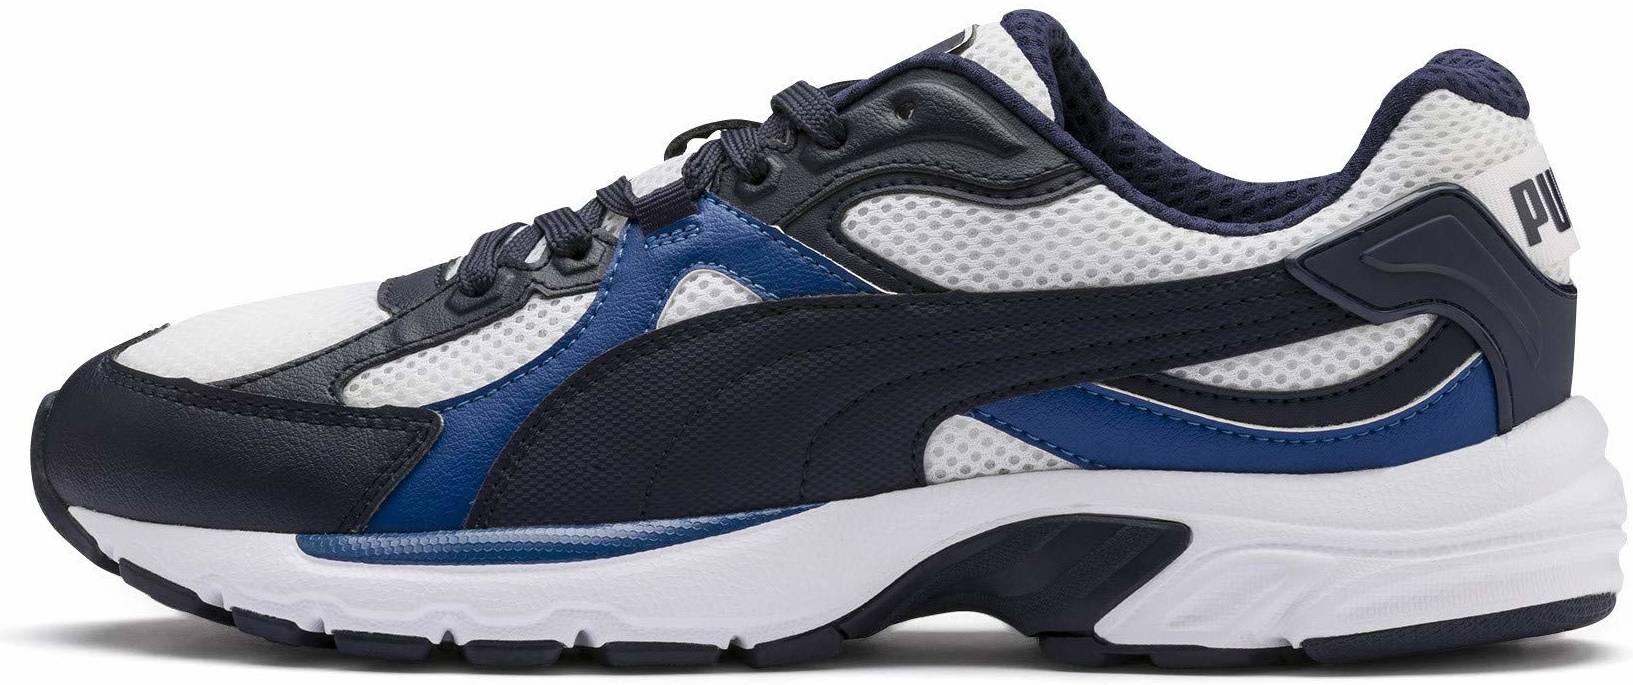 Puma Axis 90s sneakers (only $50)